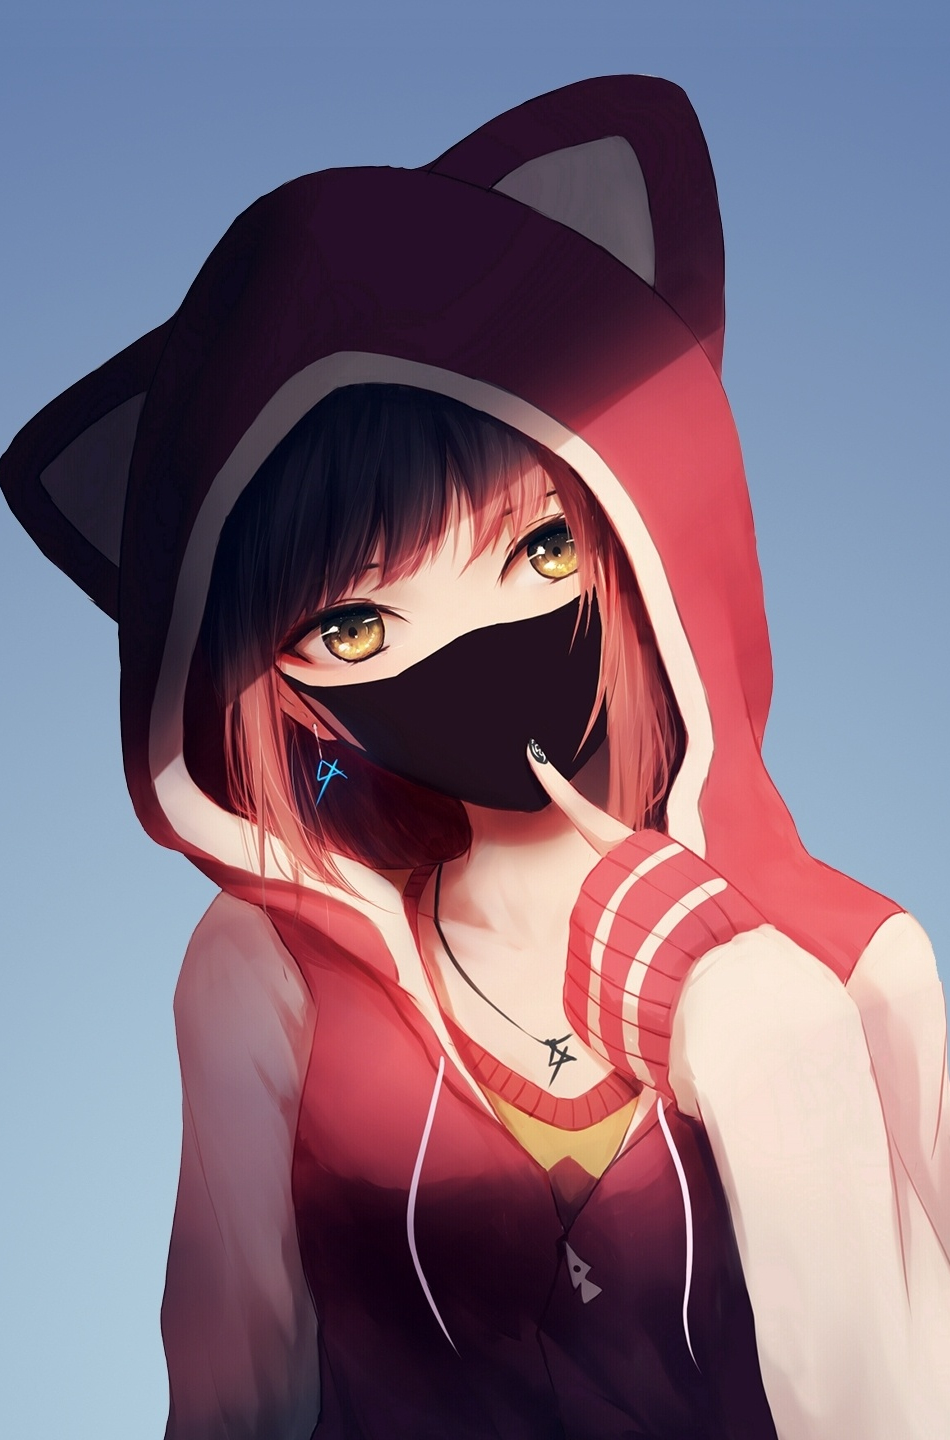 Download 950x1534 Wallpaper Anime Girl In Hoodie Mask